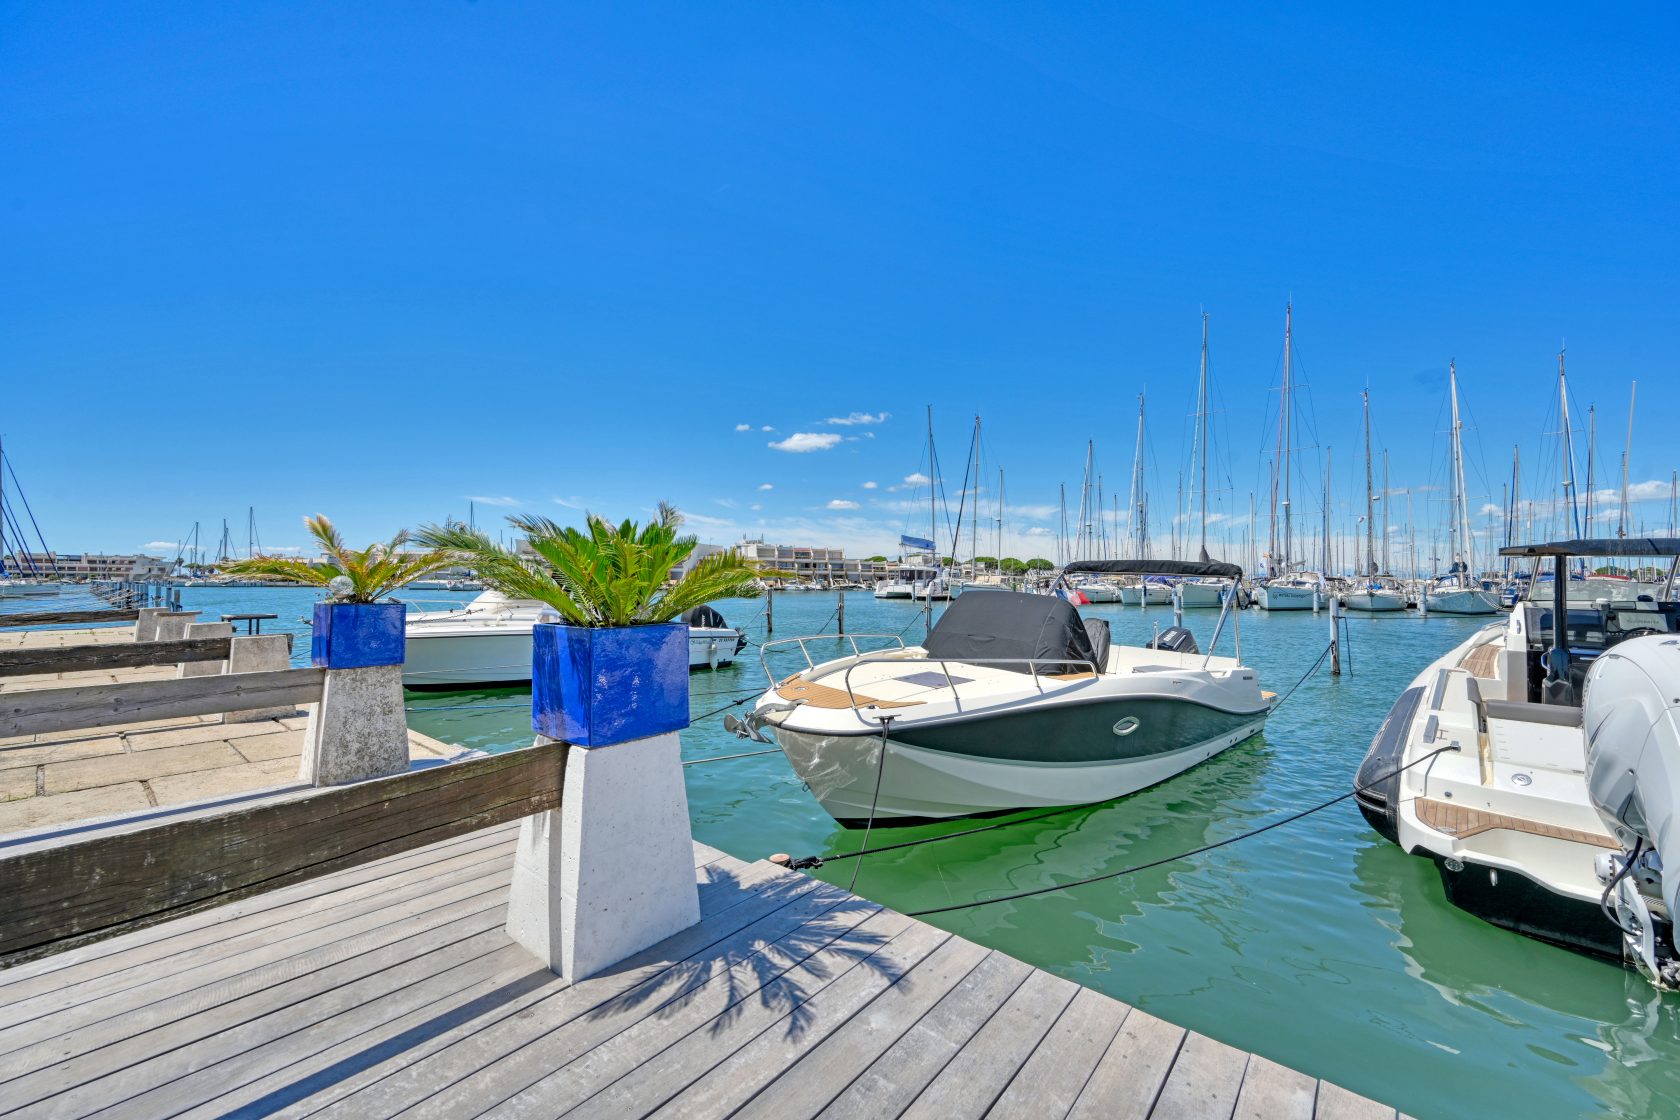 Magnificent marina with large terrace and jetty